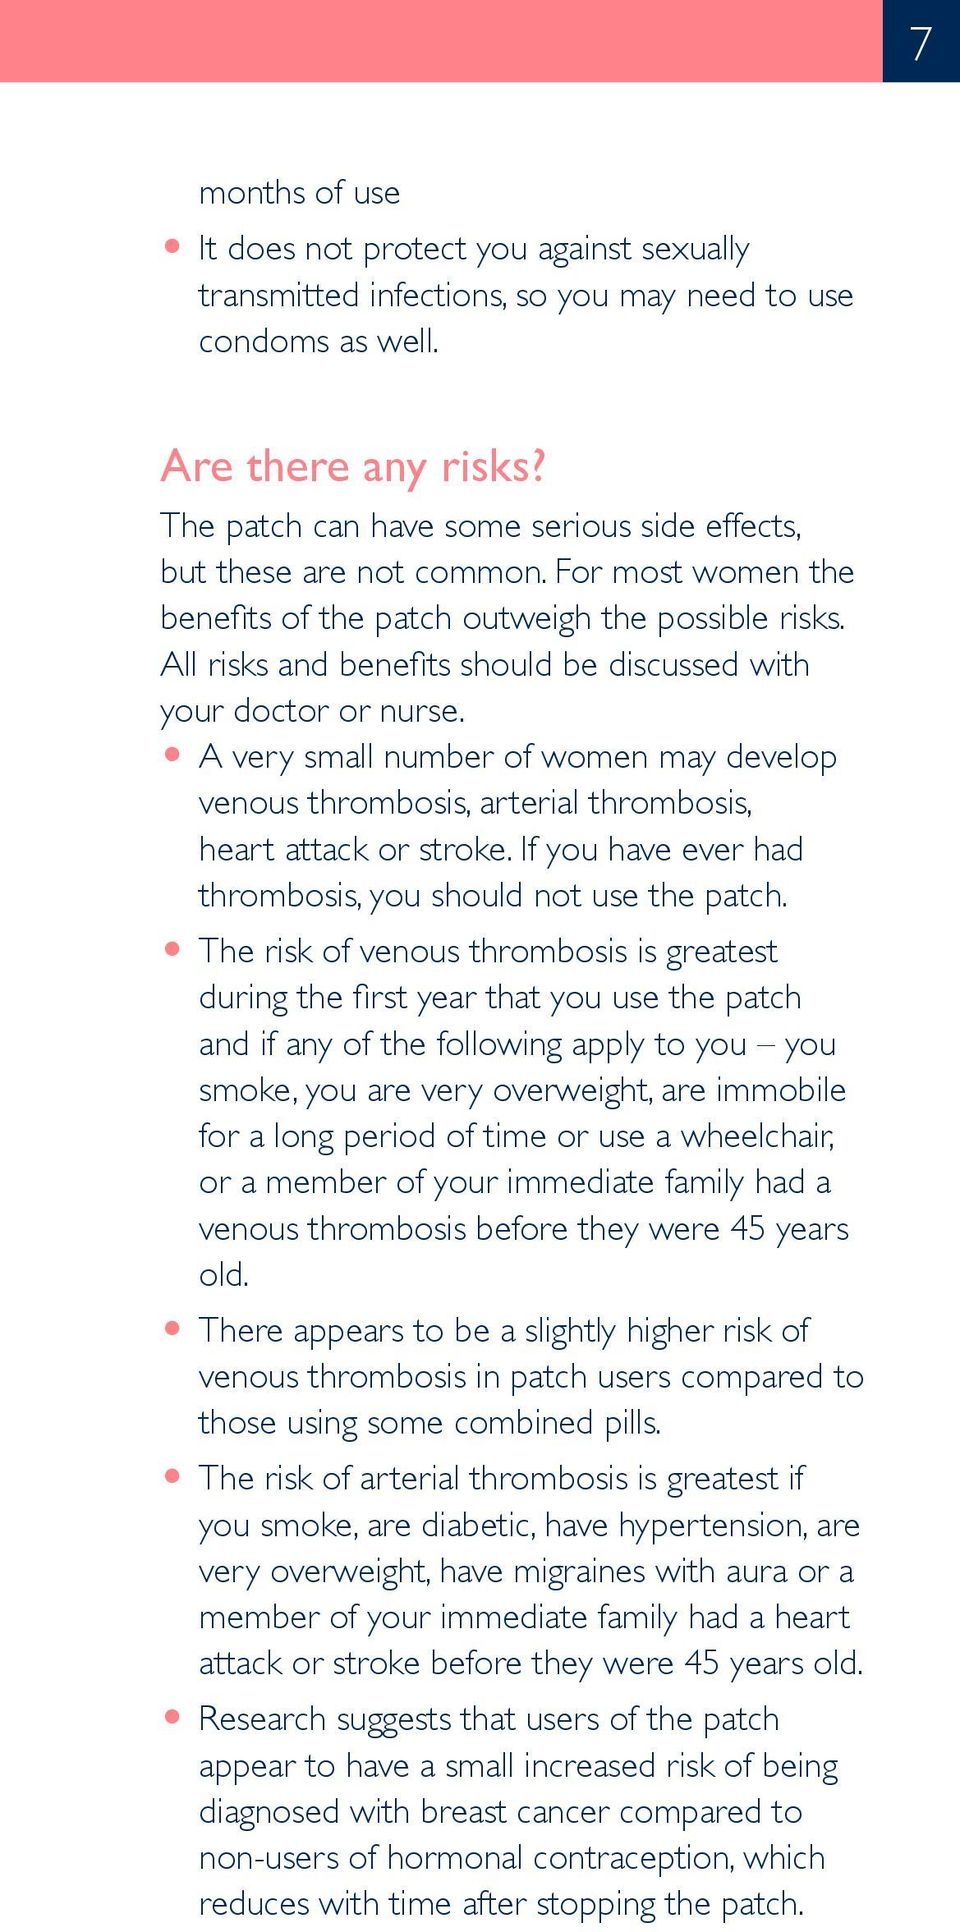 All risks and benefits should be discussed with your doctor or nurse. O A very small number of women may develop venous thrombosis, arterial thrombosis, heart attack or stroke.